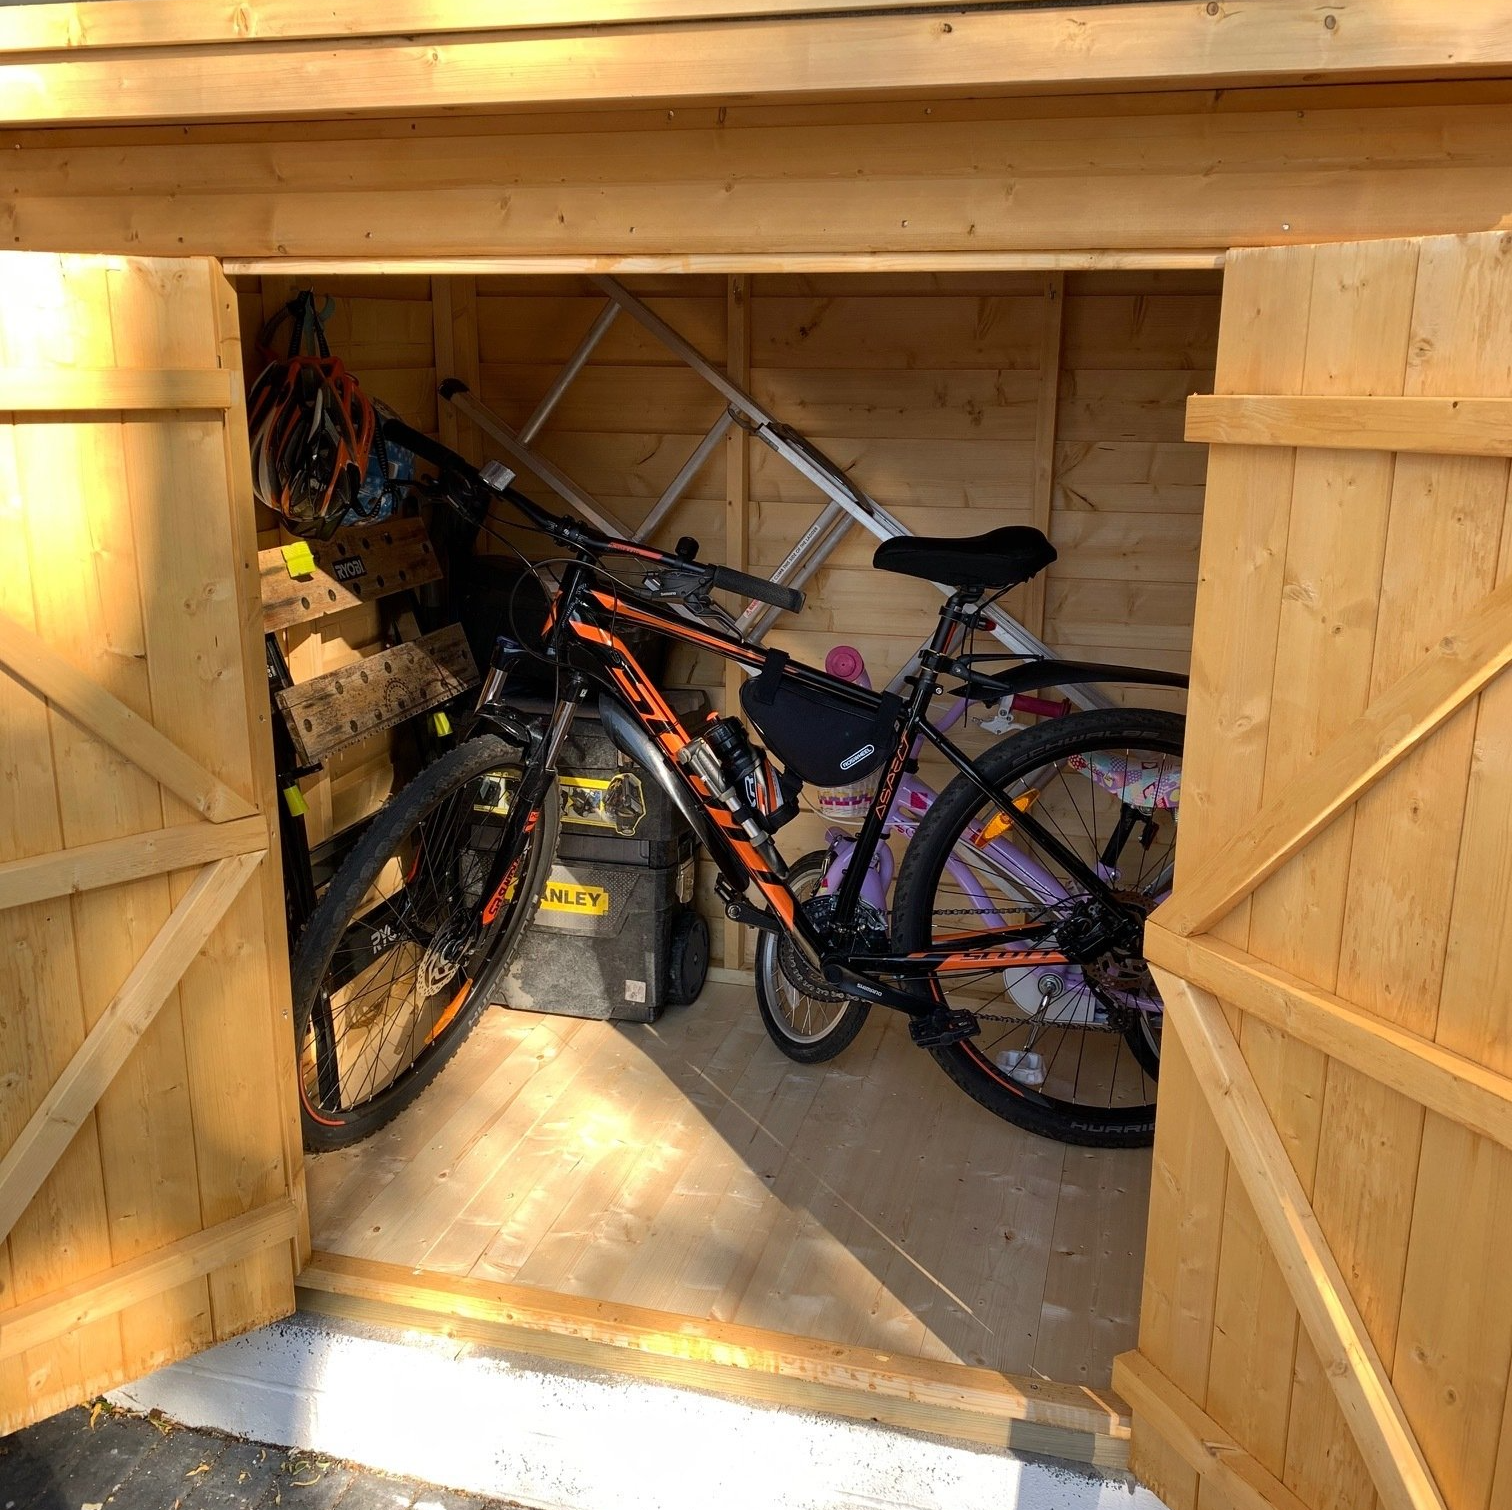 Bike store deep enough to hold a few bikes for a family and some tools. Brenton pad bolt installed so you can lock up securely.